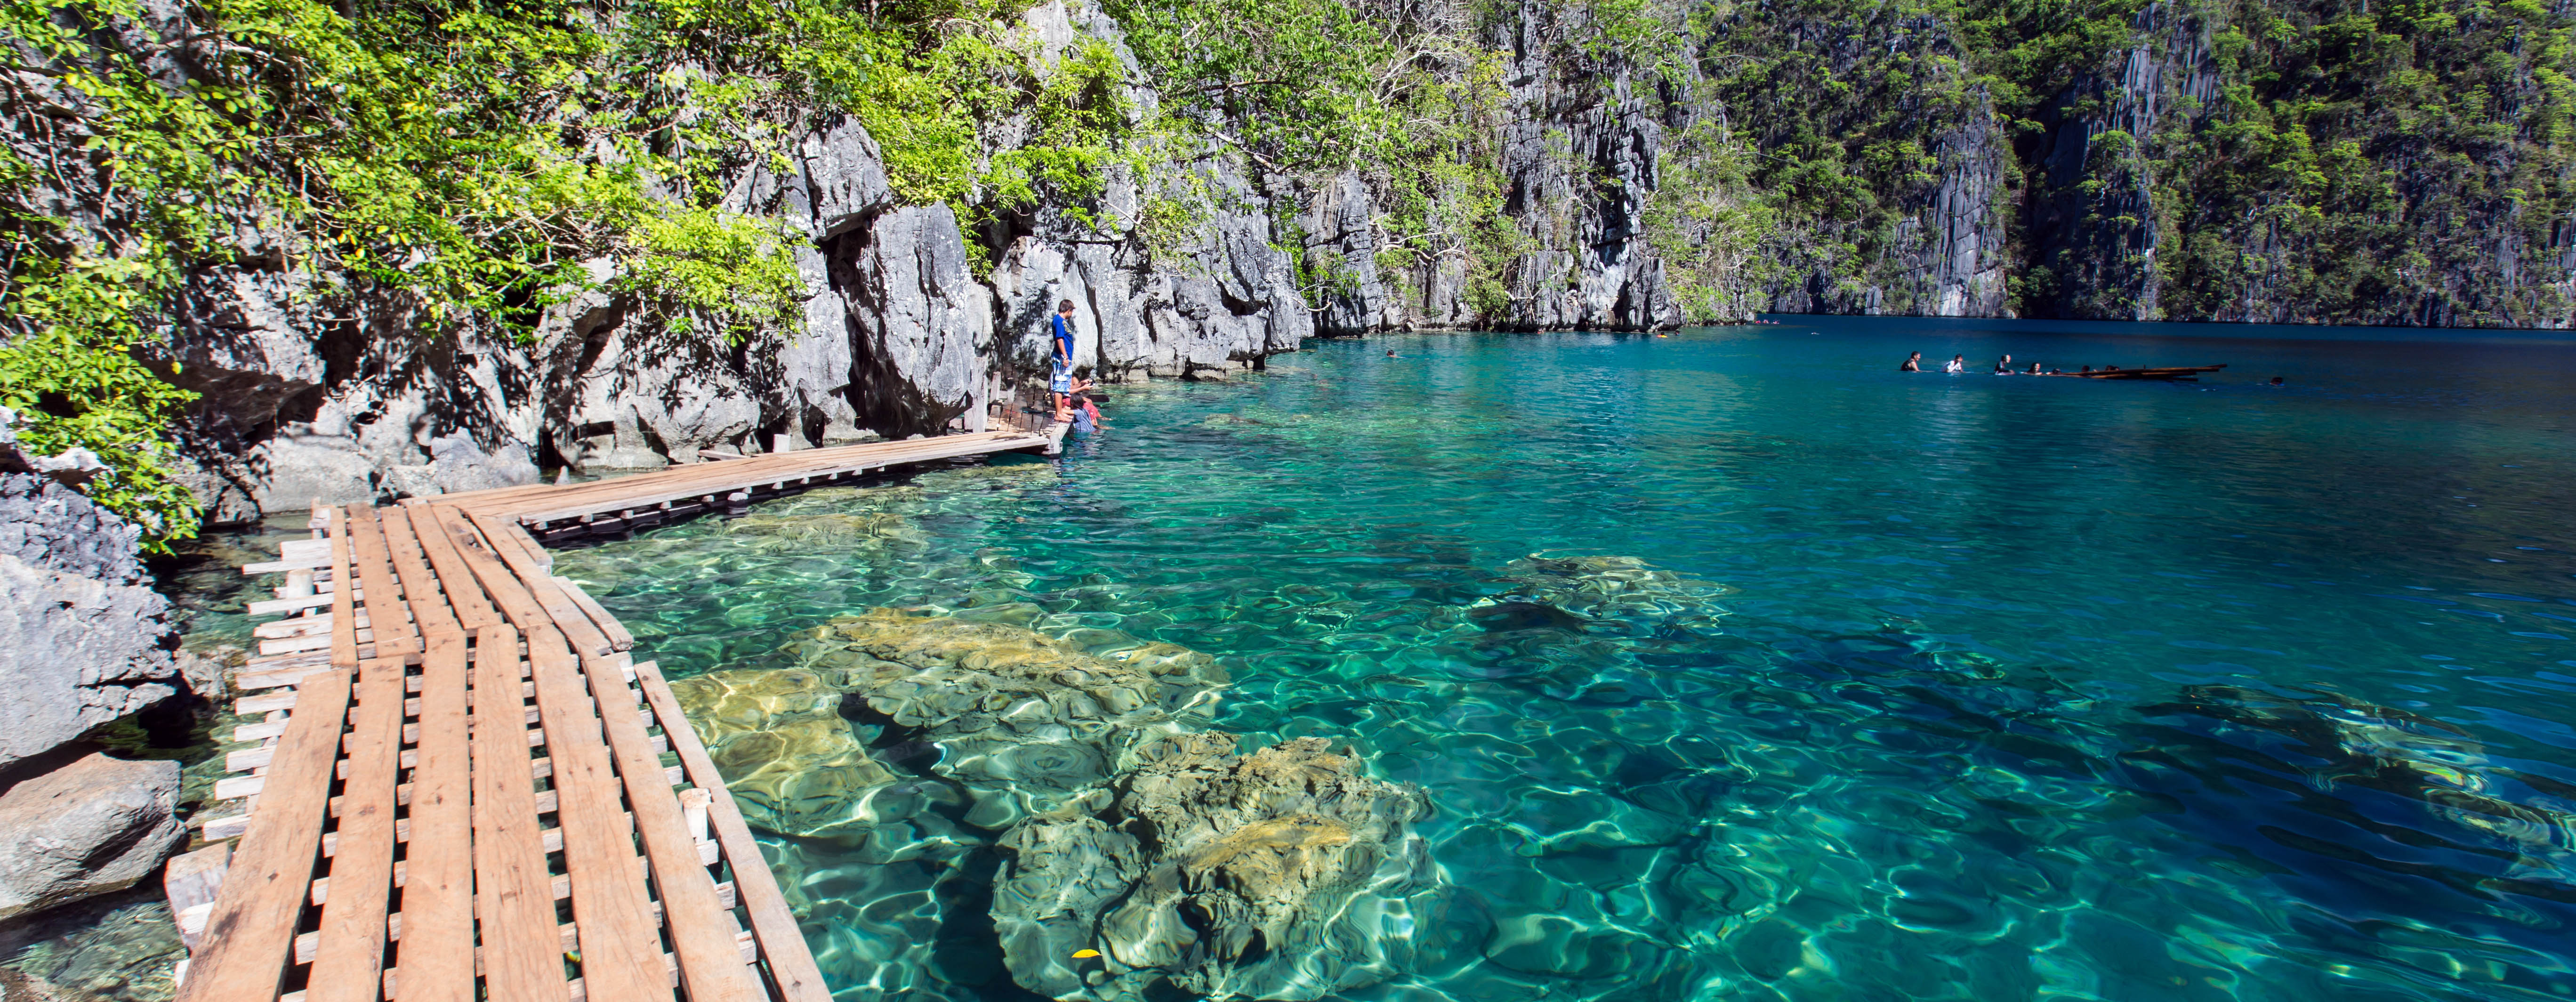 cheapest tour package in coron palawan